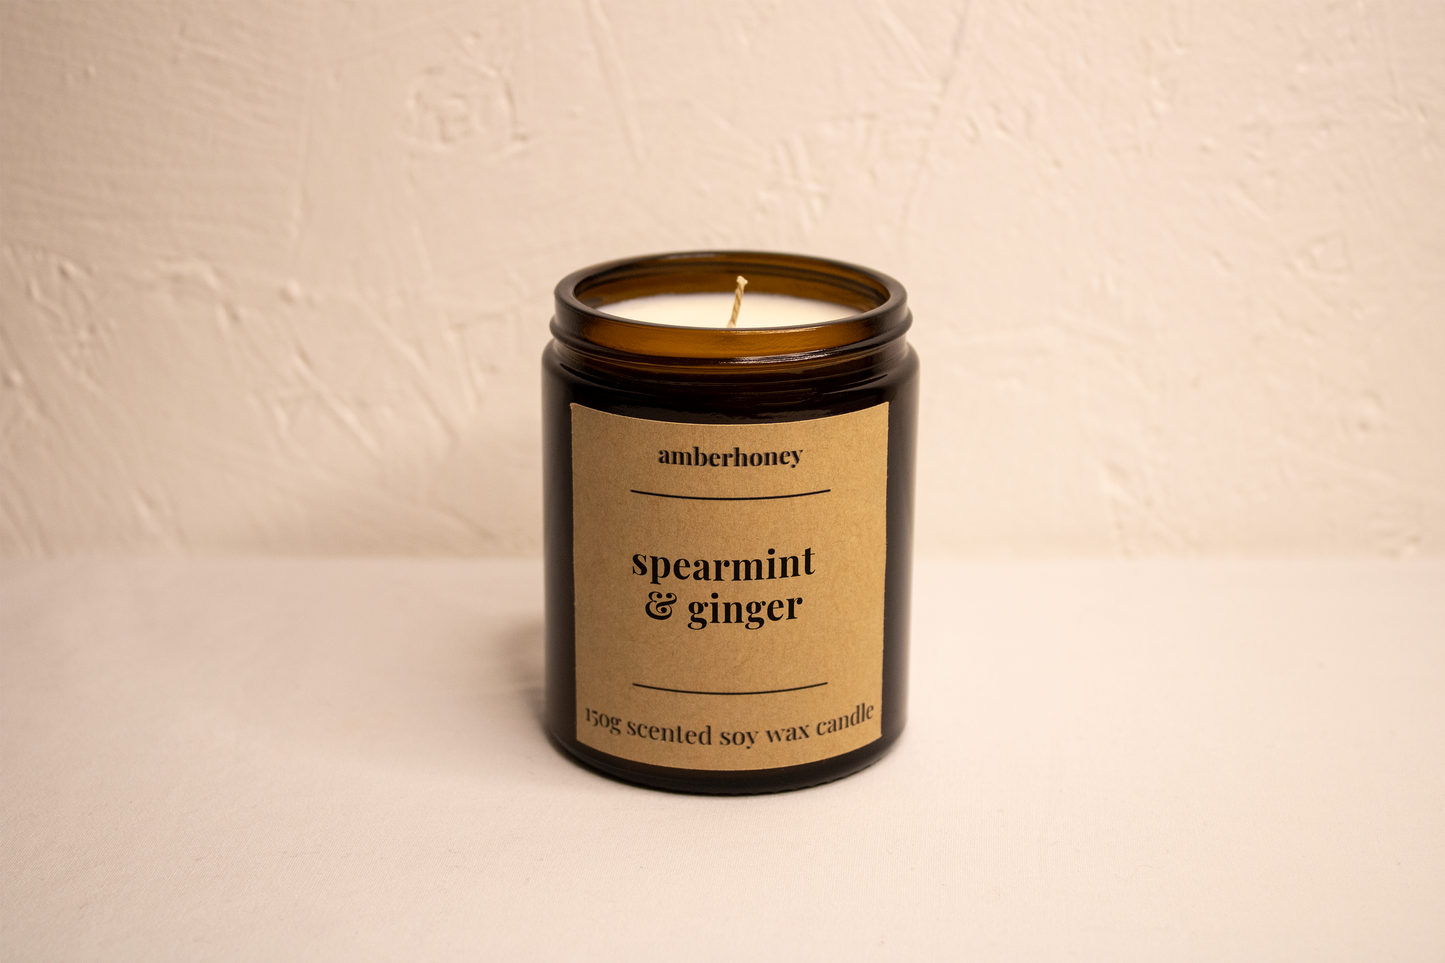 150g spearmint & ginger soy wax candle